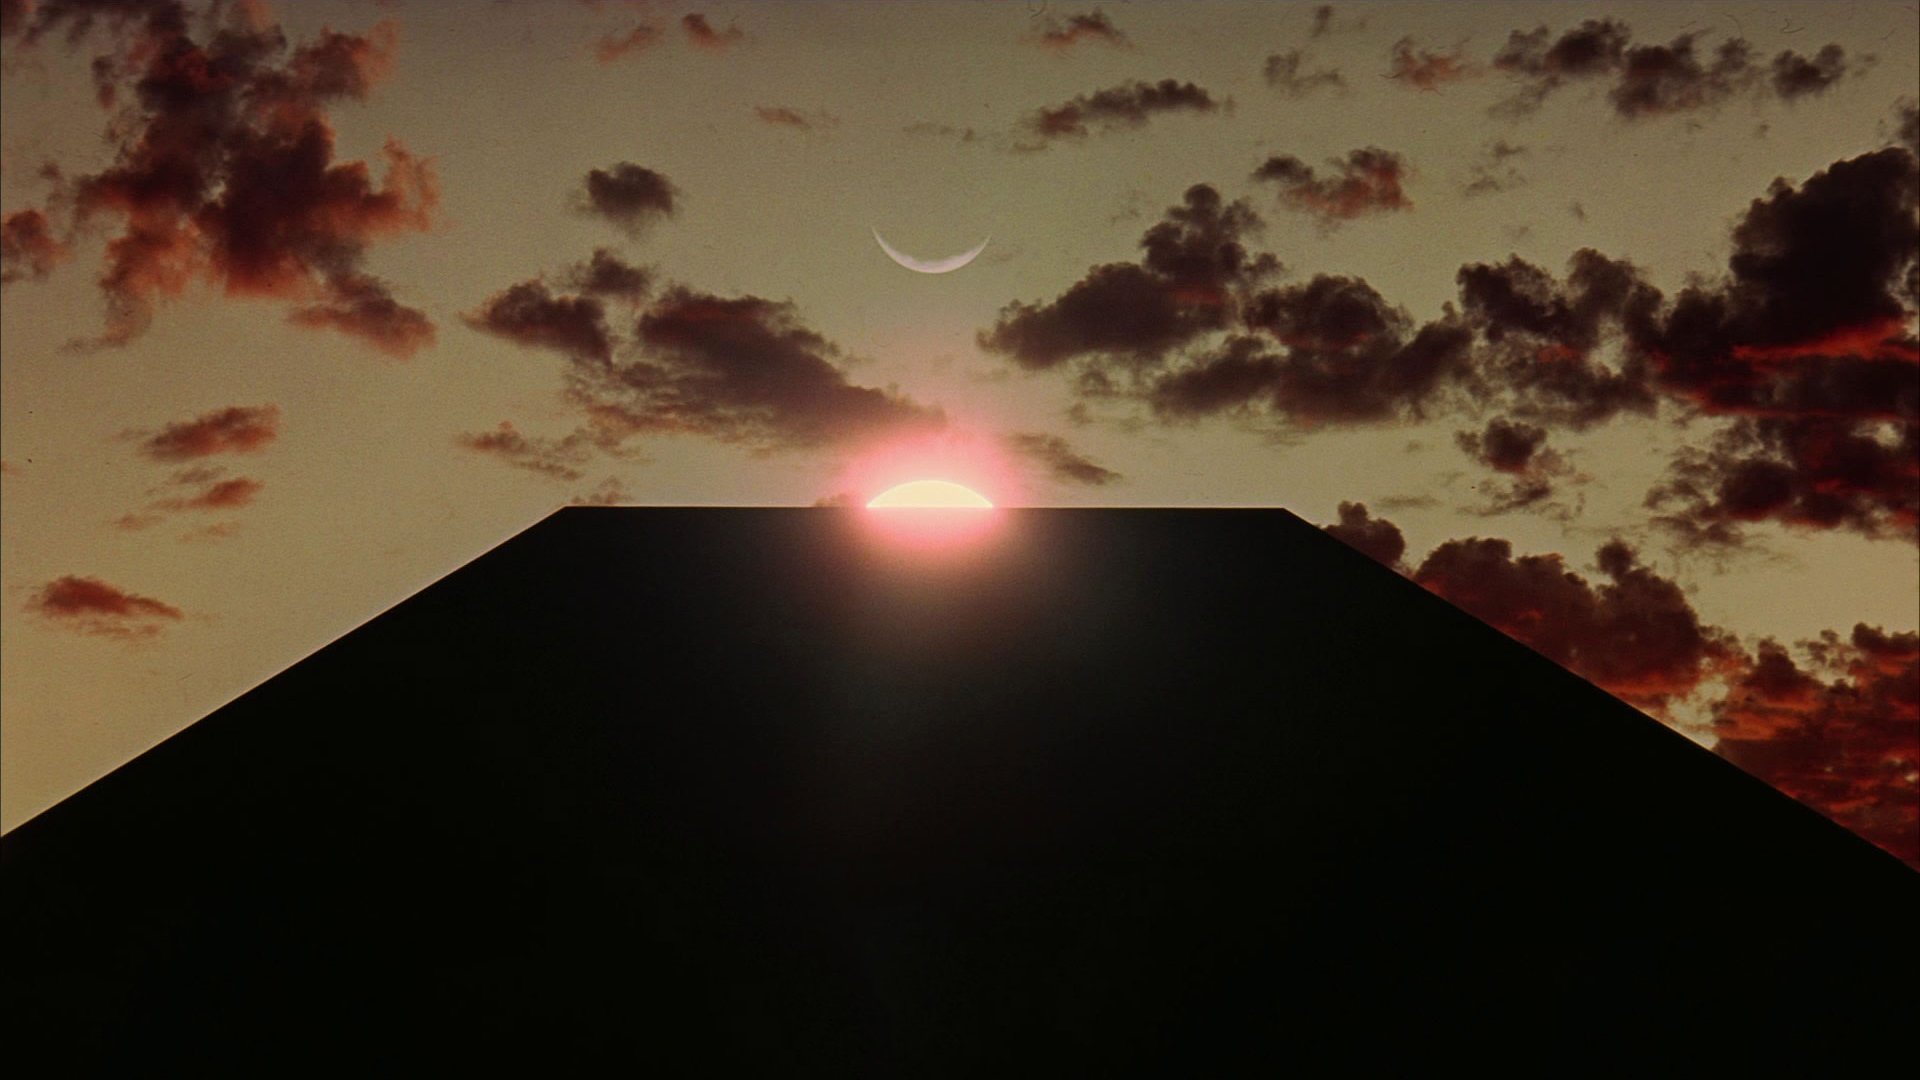 Image of the 2001 Space Odyssey monolith